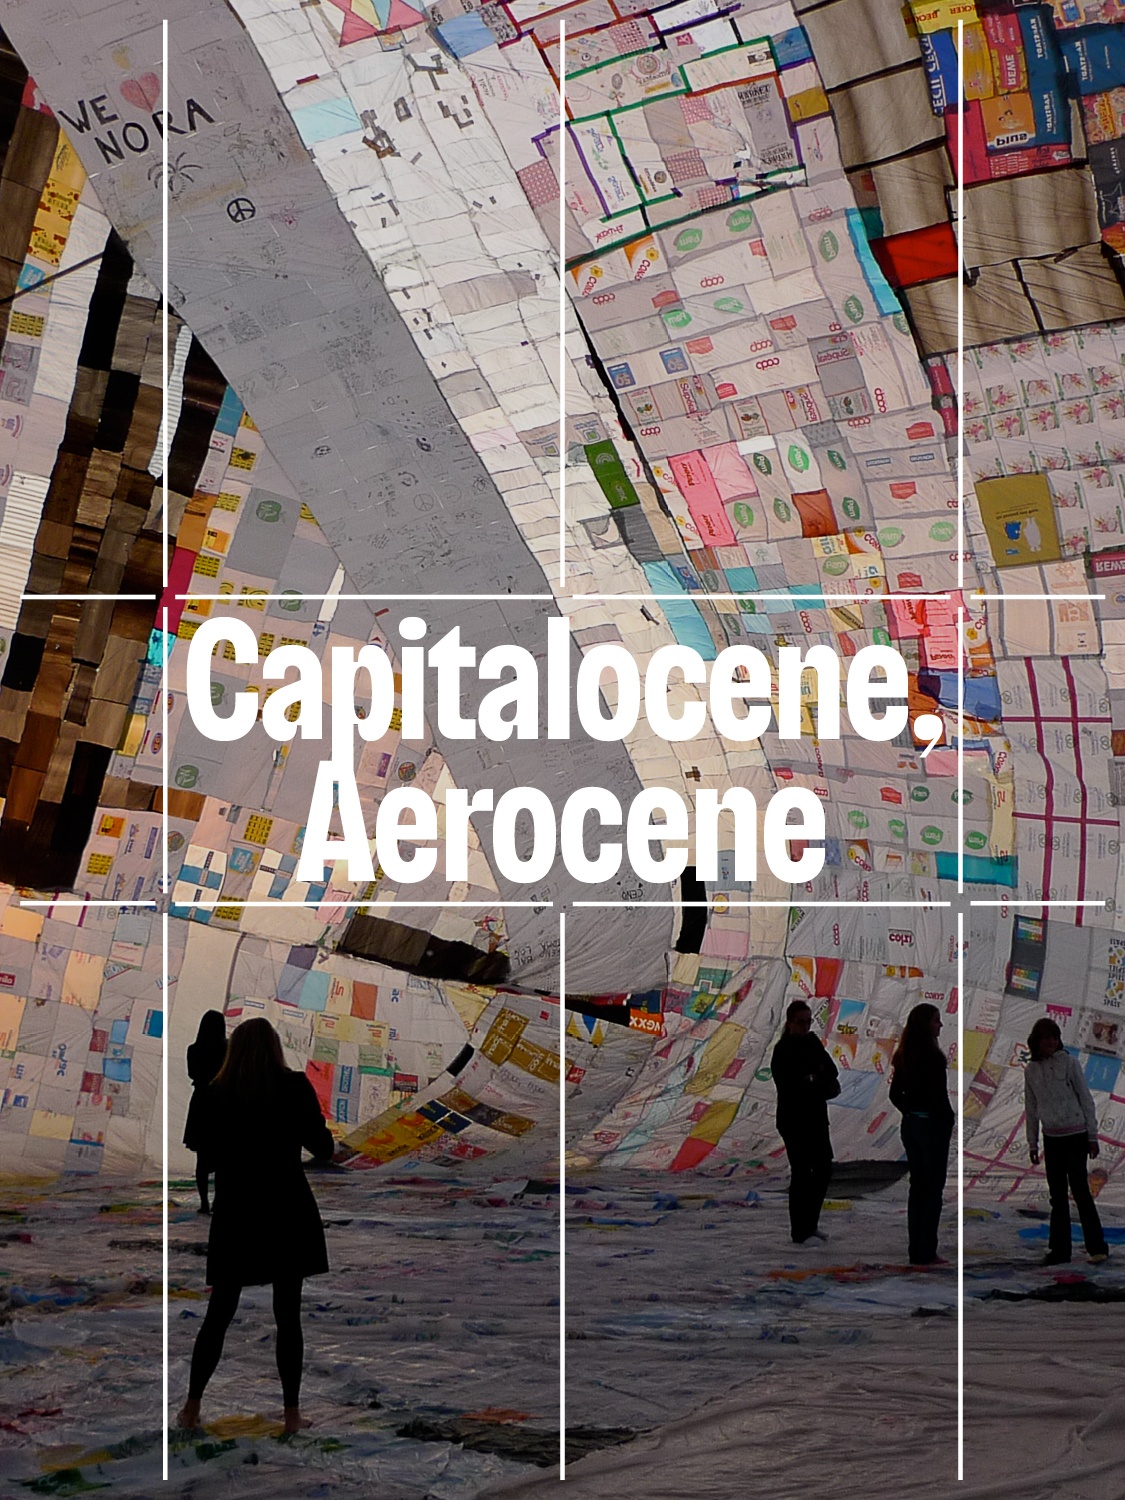 The event title "Capitalocene, Aerocene" overlaid on a photo of people wandering around a cavernous inflated balloon made from a colorful patchwork of recycled plastic bags.